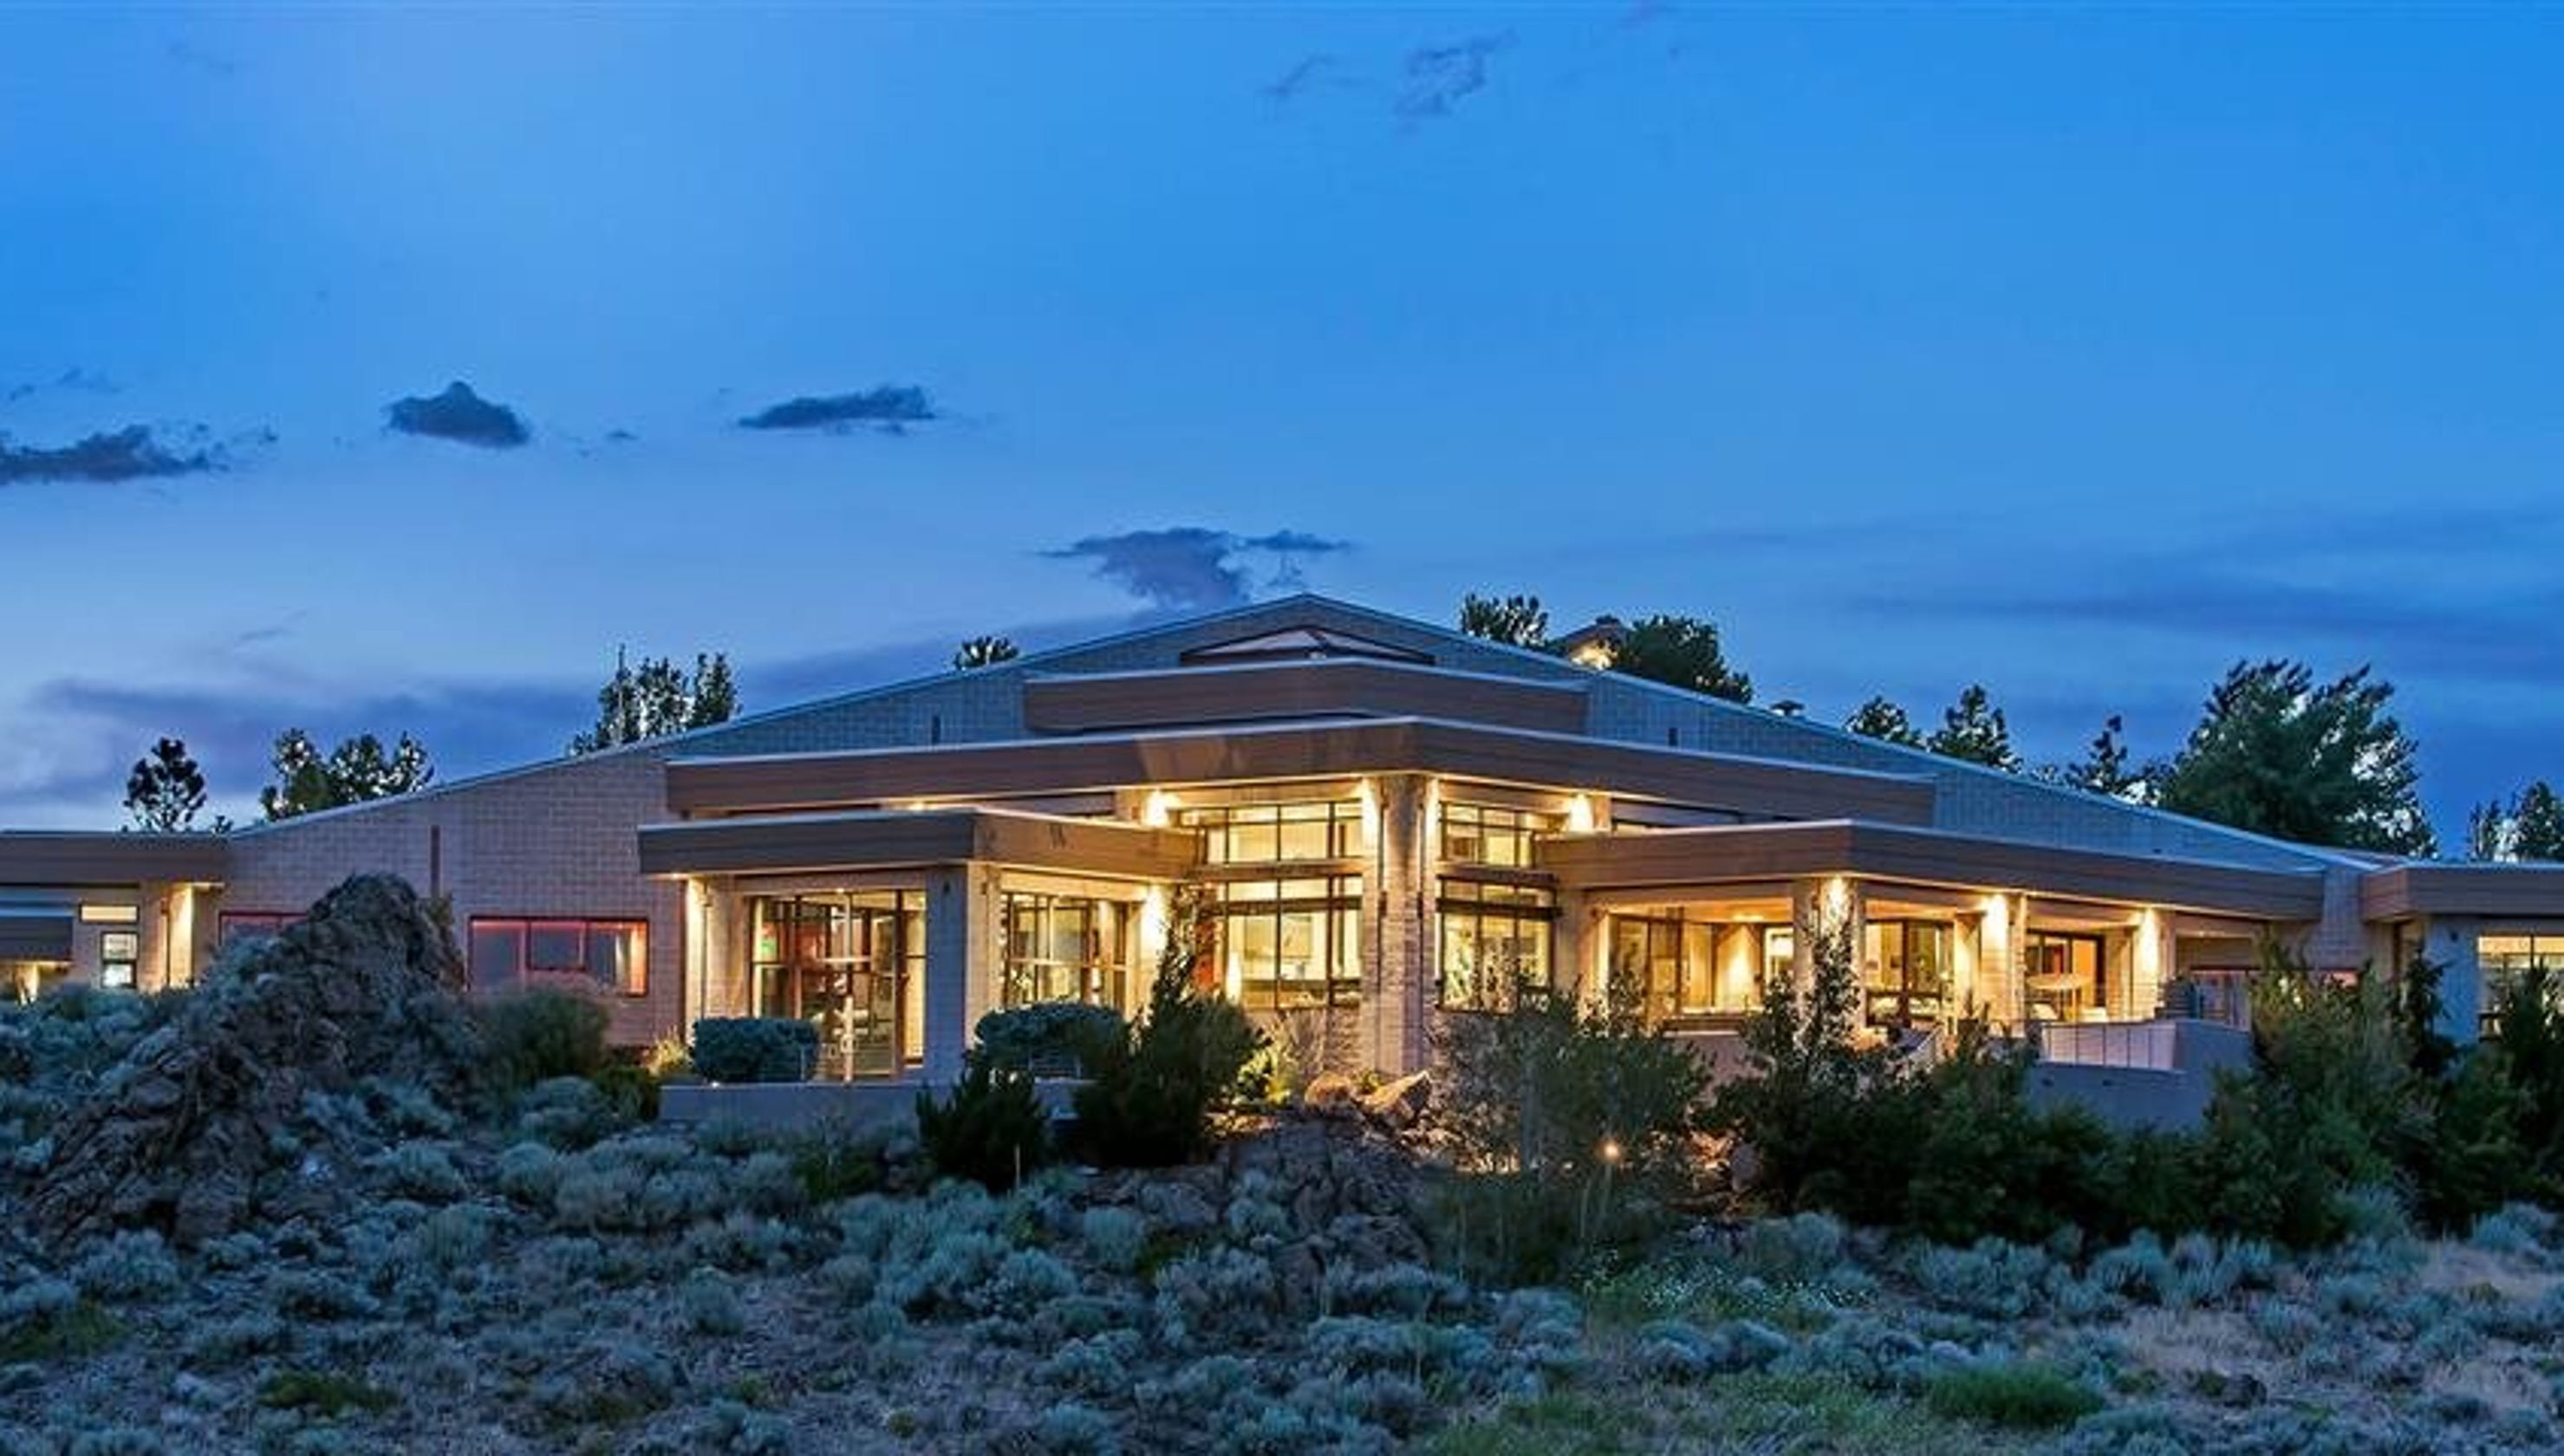 The 15 most expensive home sales in Reno in 2018